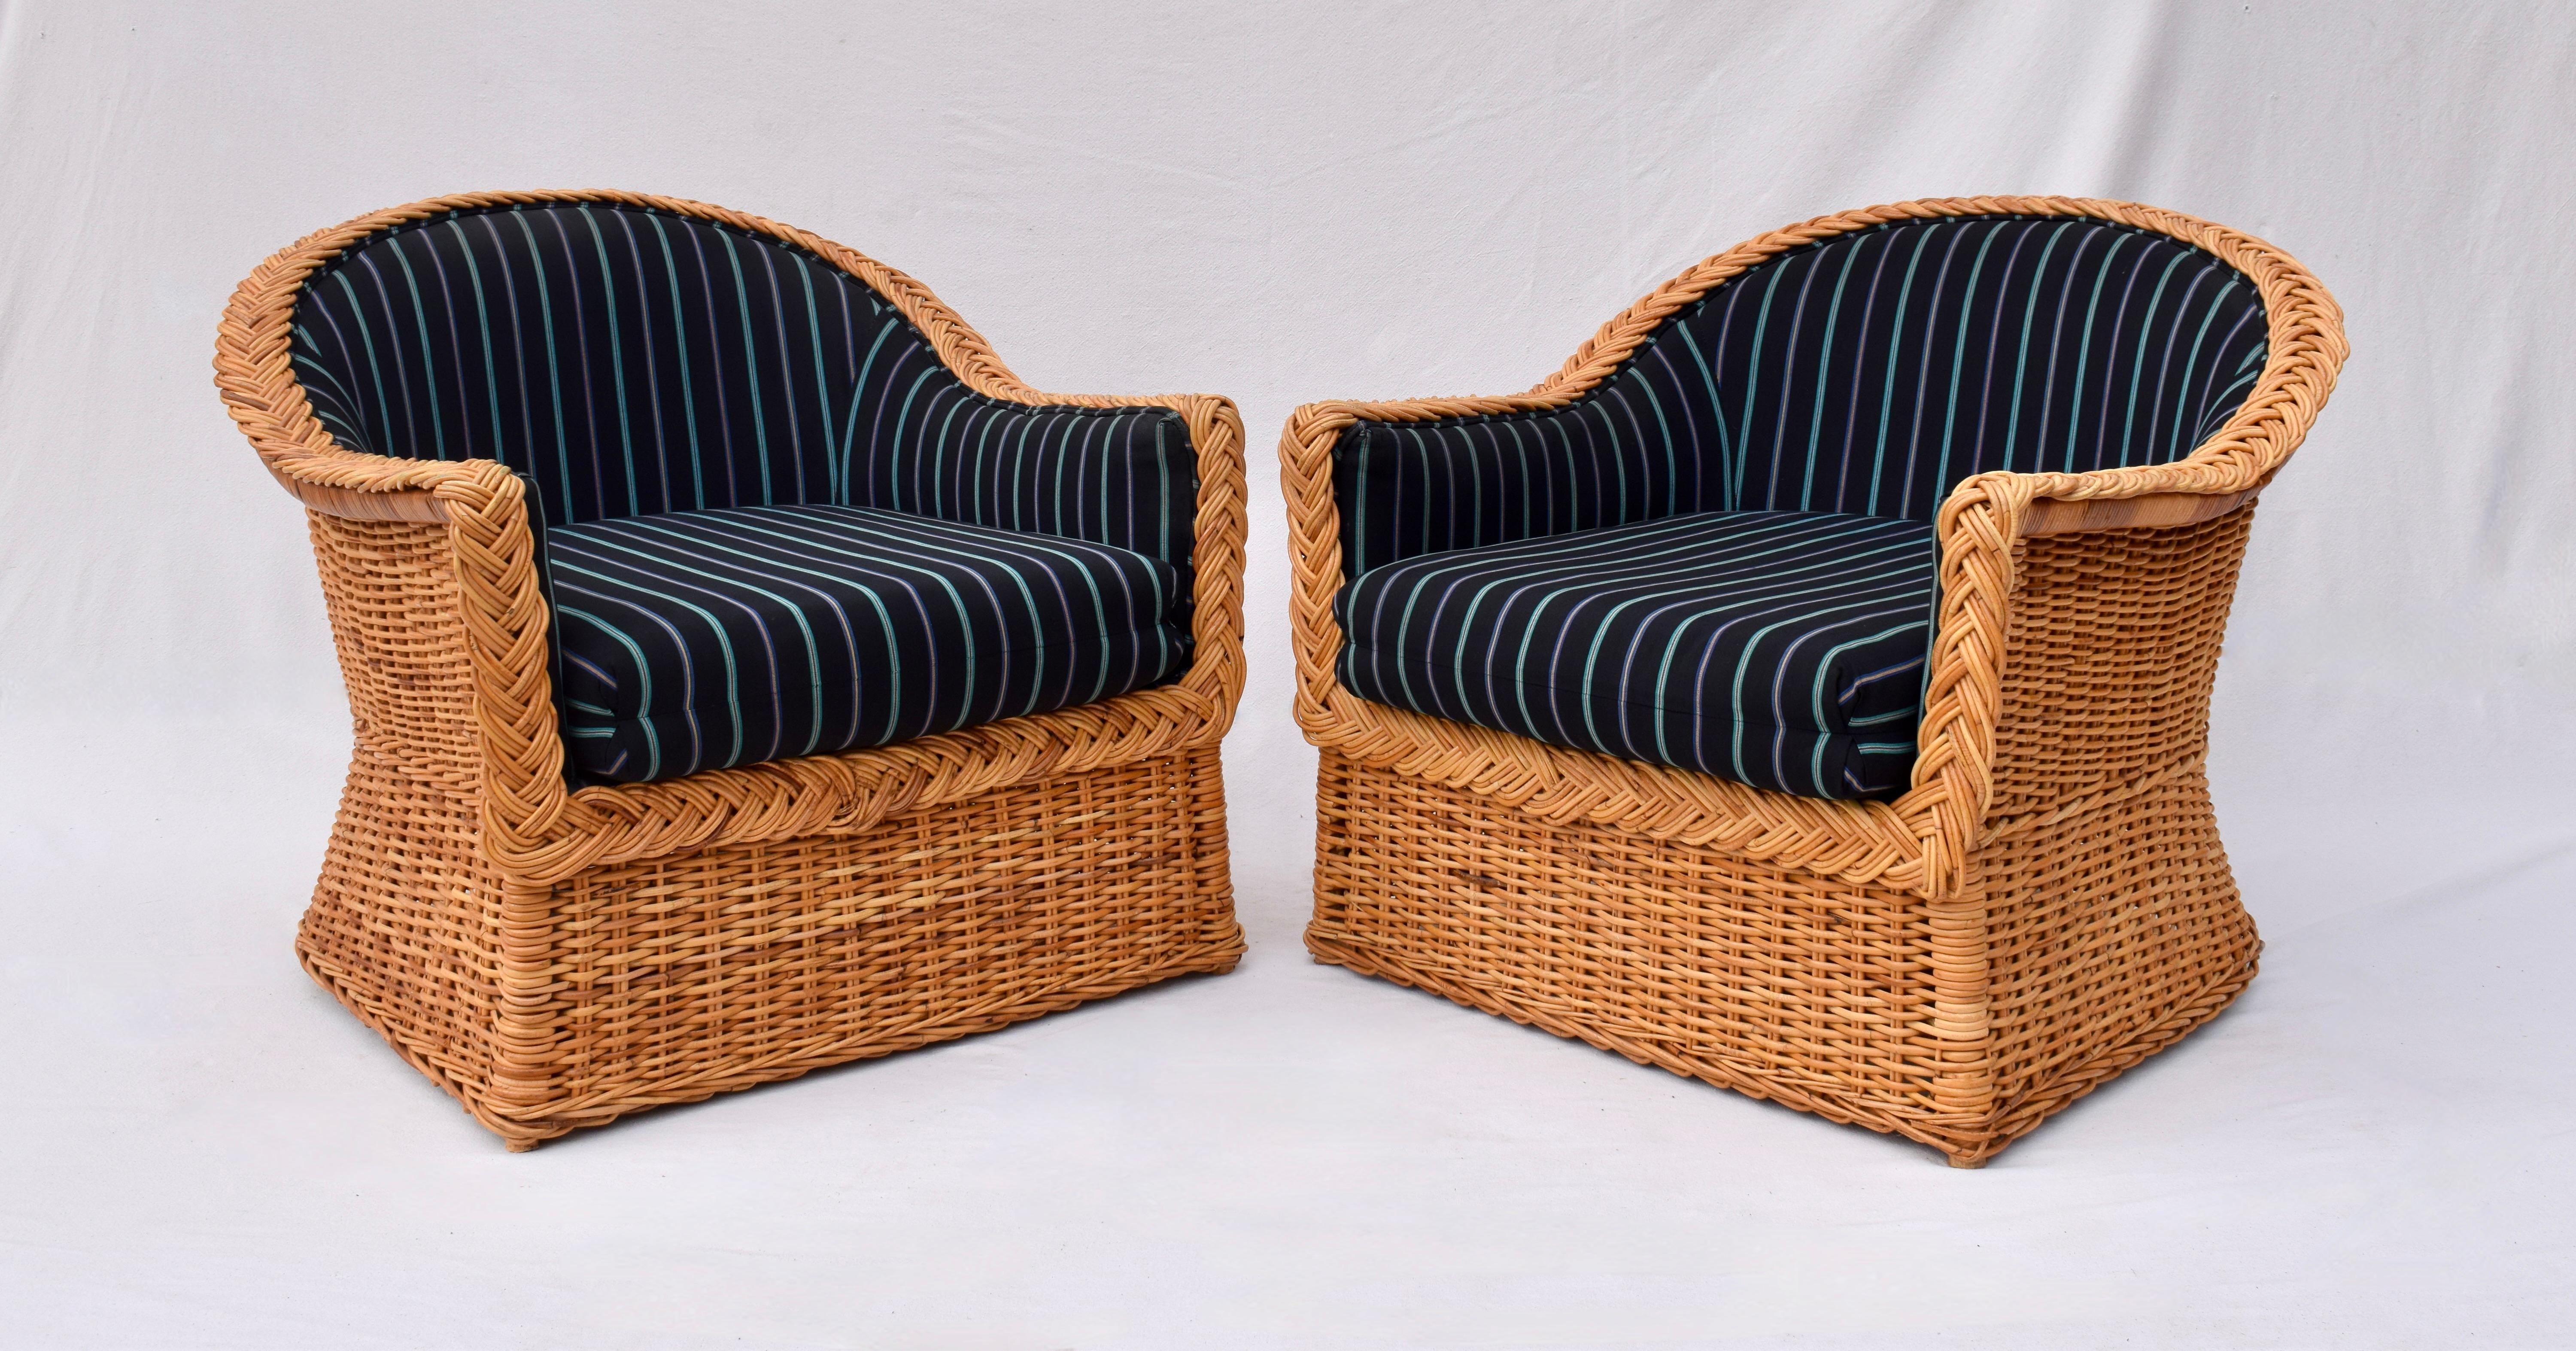 1980's Wicker Works Braided Rattan Club Chairs, Pair For Sale 1